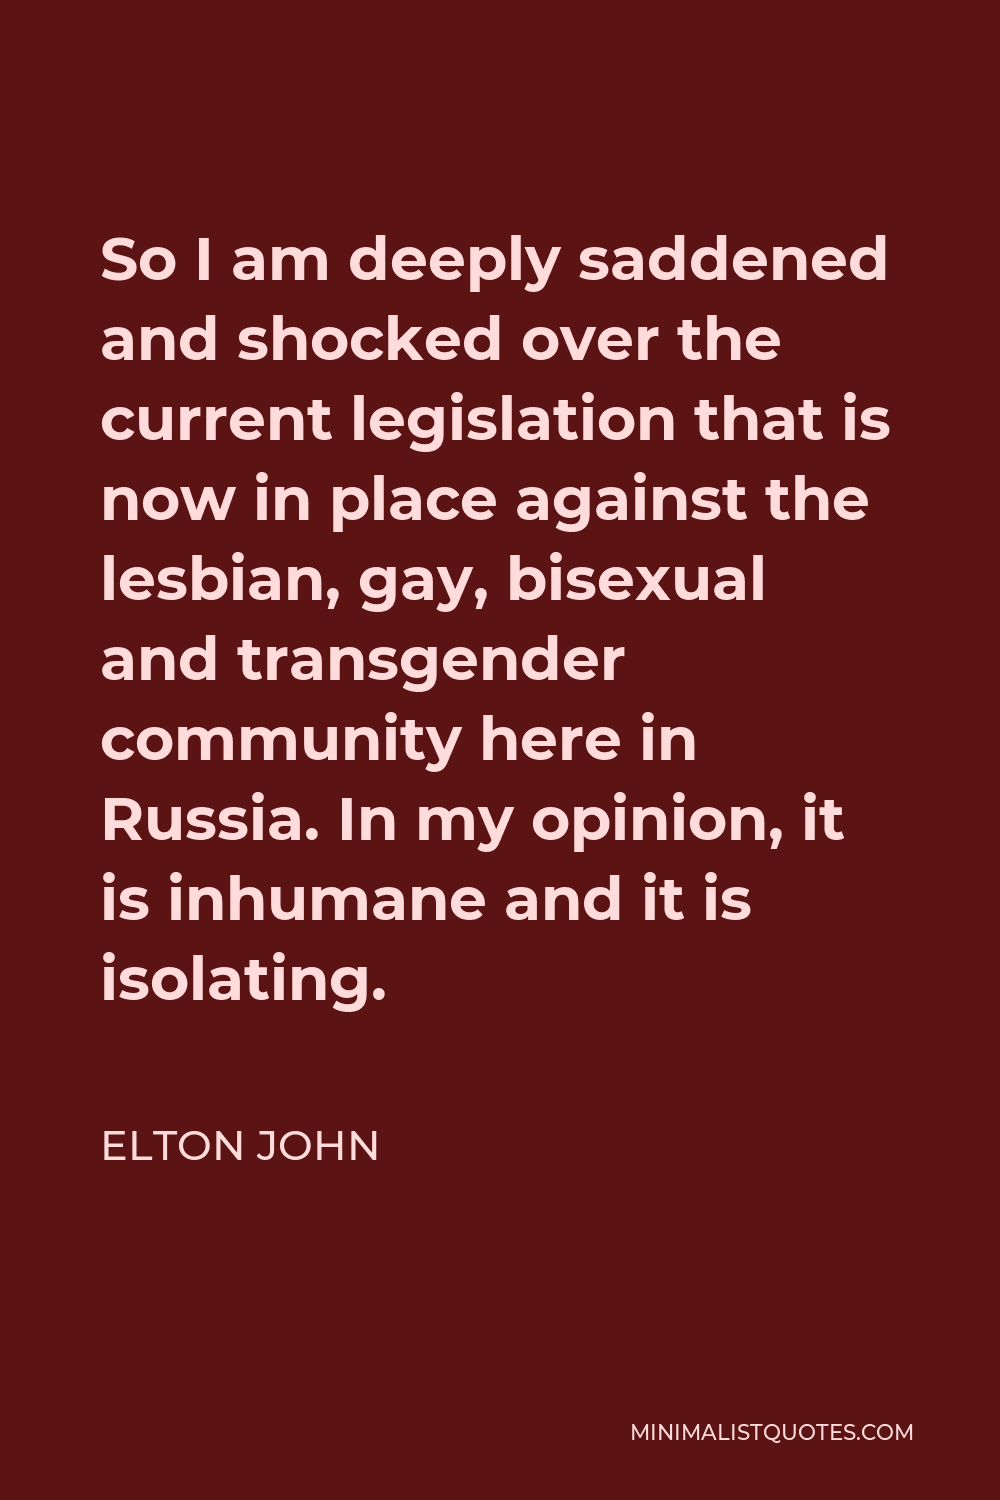 Elton John Quote - So I am deeply saddened and shocked over the current legislation that is now in place against the lesbian, gay, bisexual and transgender community here in Russia. In my opinion, it is inhumane and it is isolating.